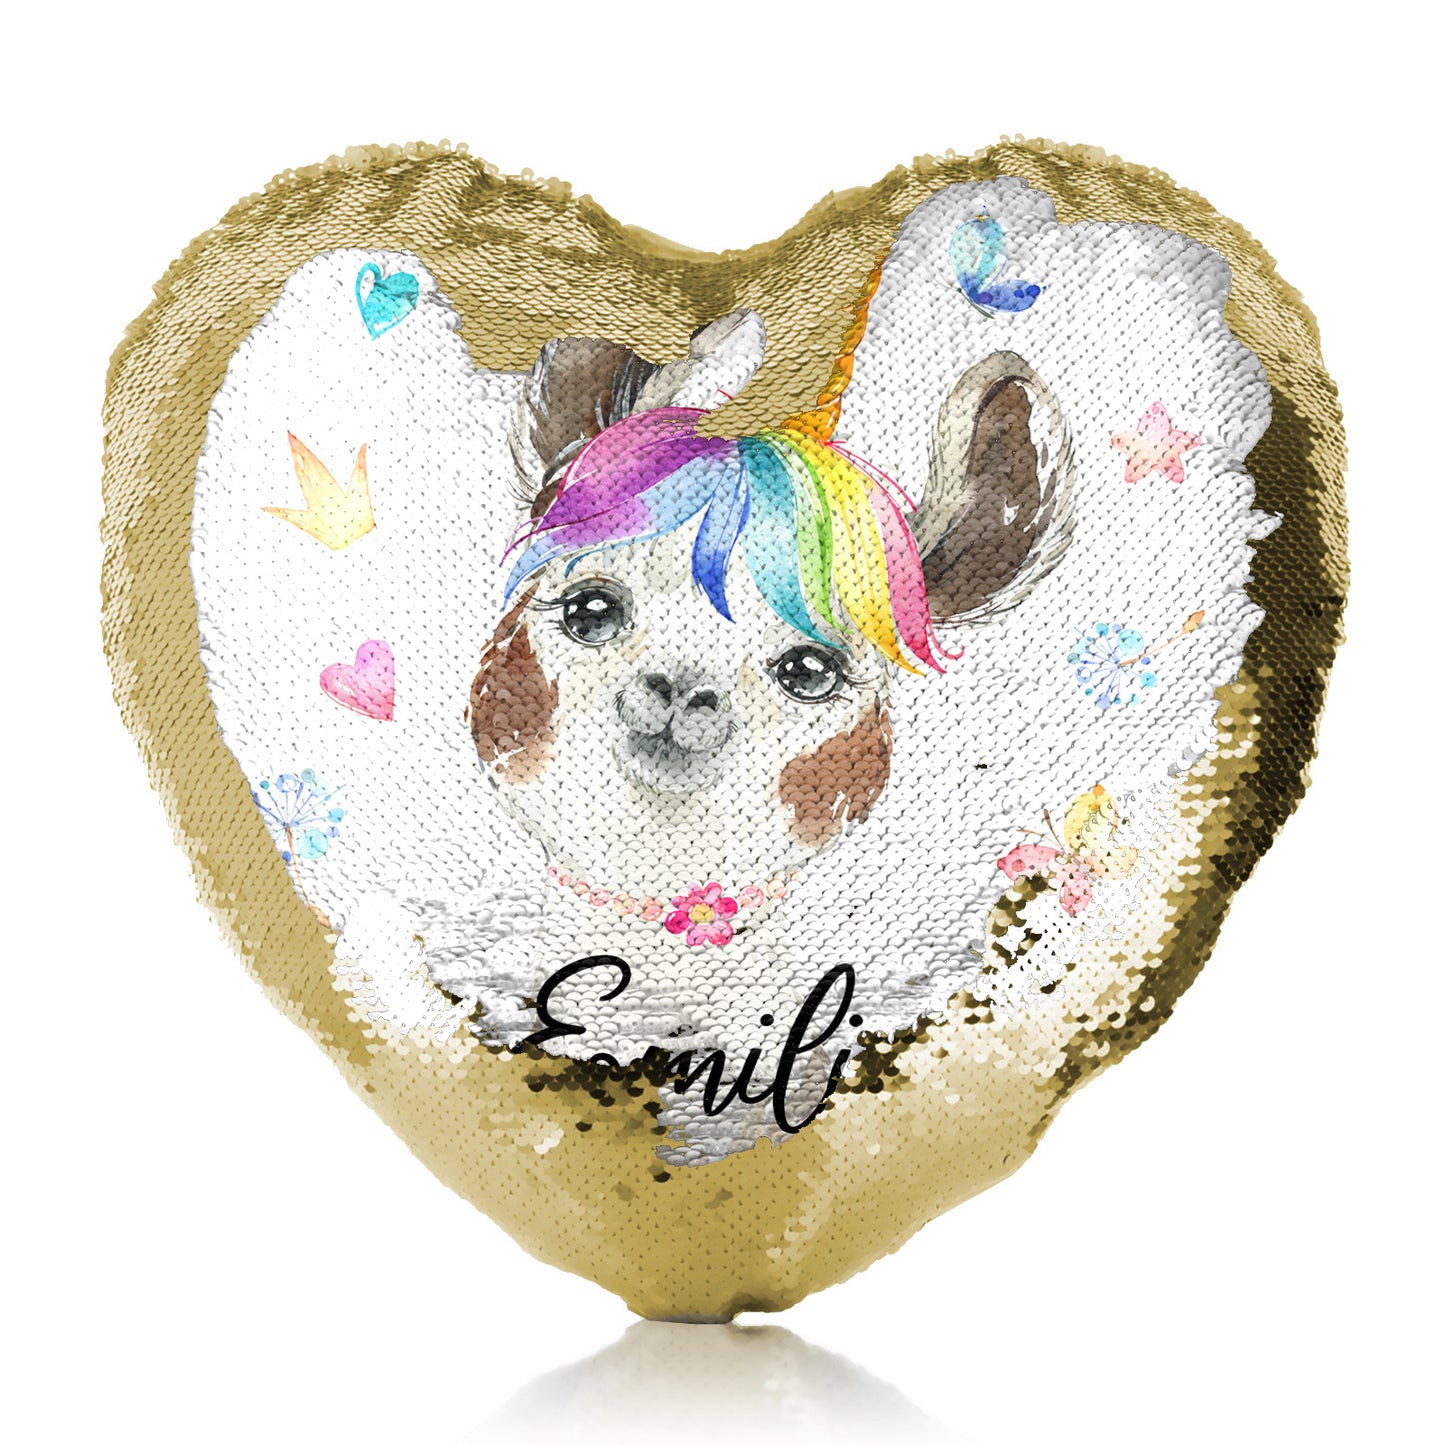 Personalised Sequin Heart Cushion with Alpaca Unicorn with Rainbow Hair Hearts Stars and Cute Text